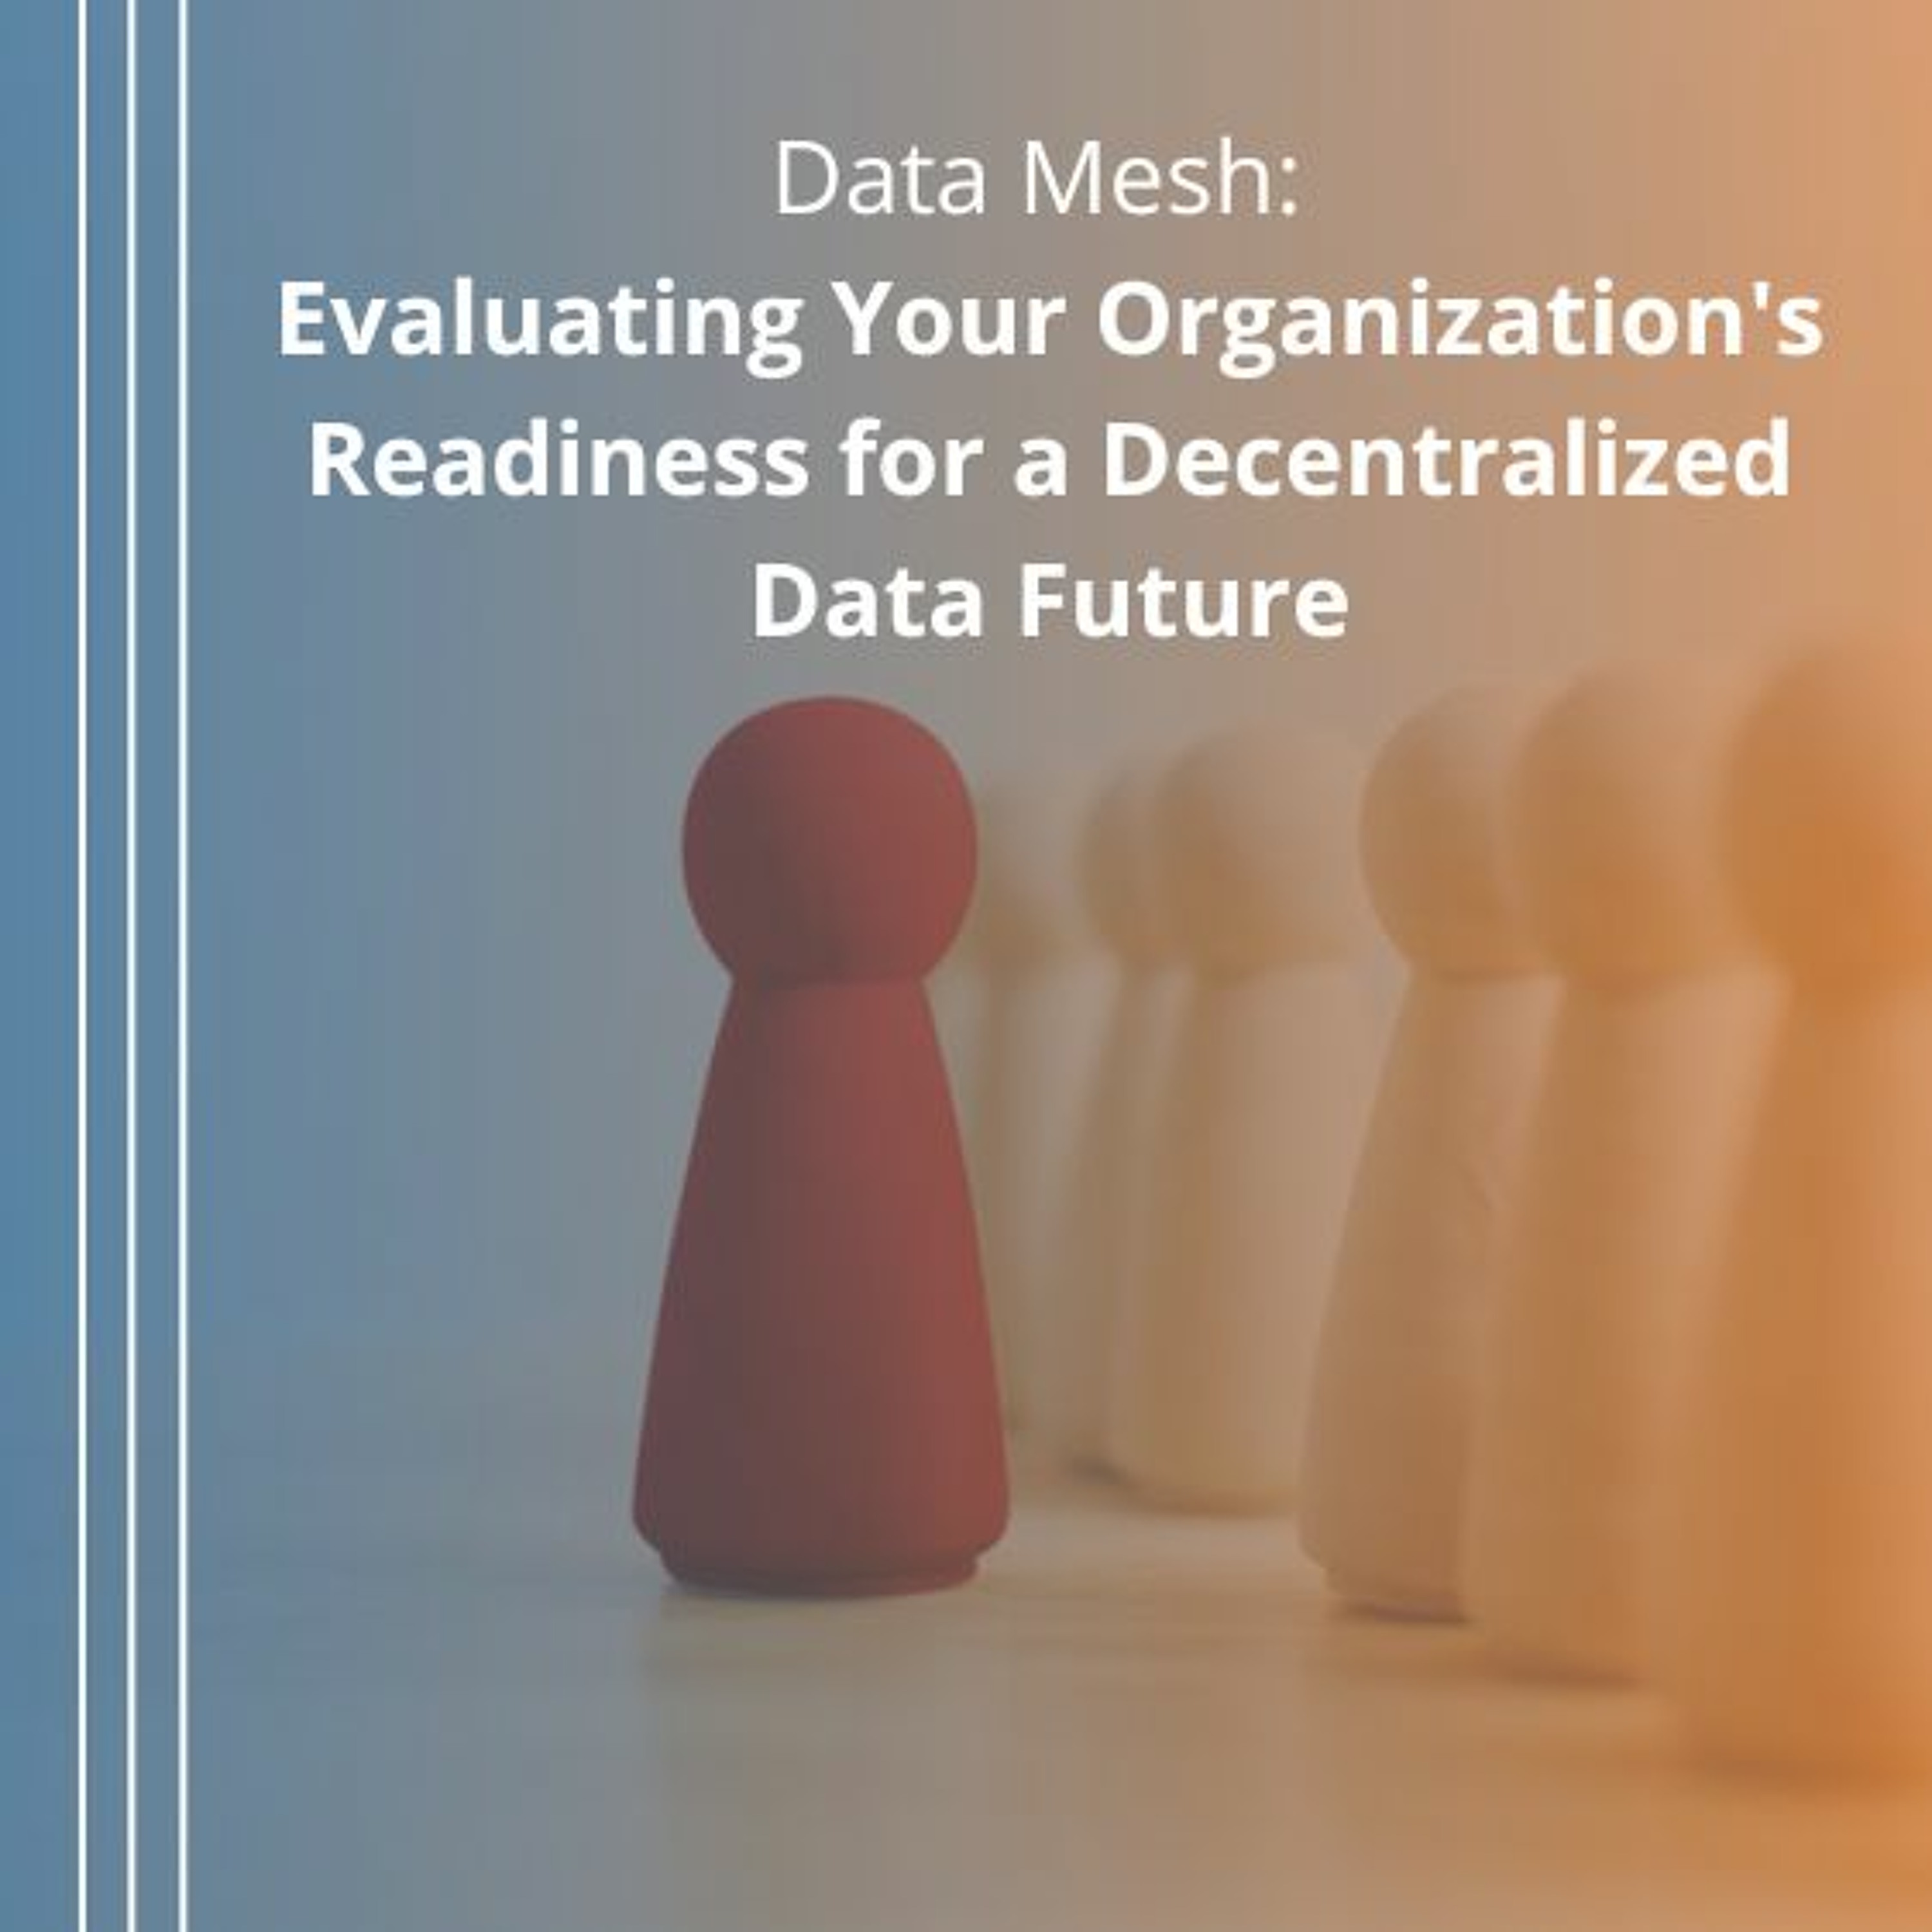 Data Mesh: Evaluating Your Organization's Readiness for a Decentralized Data Future - Audio Blog